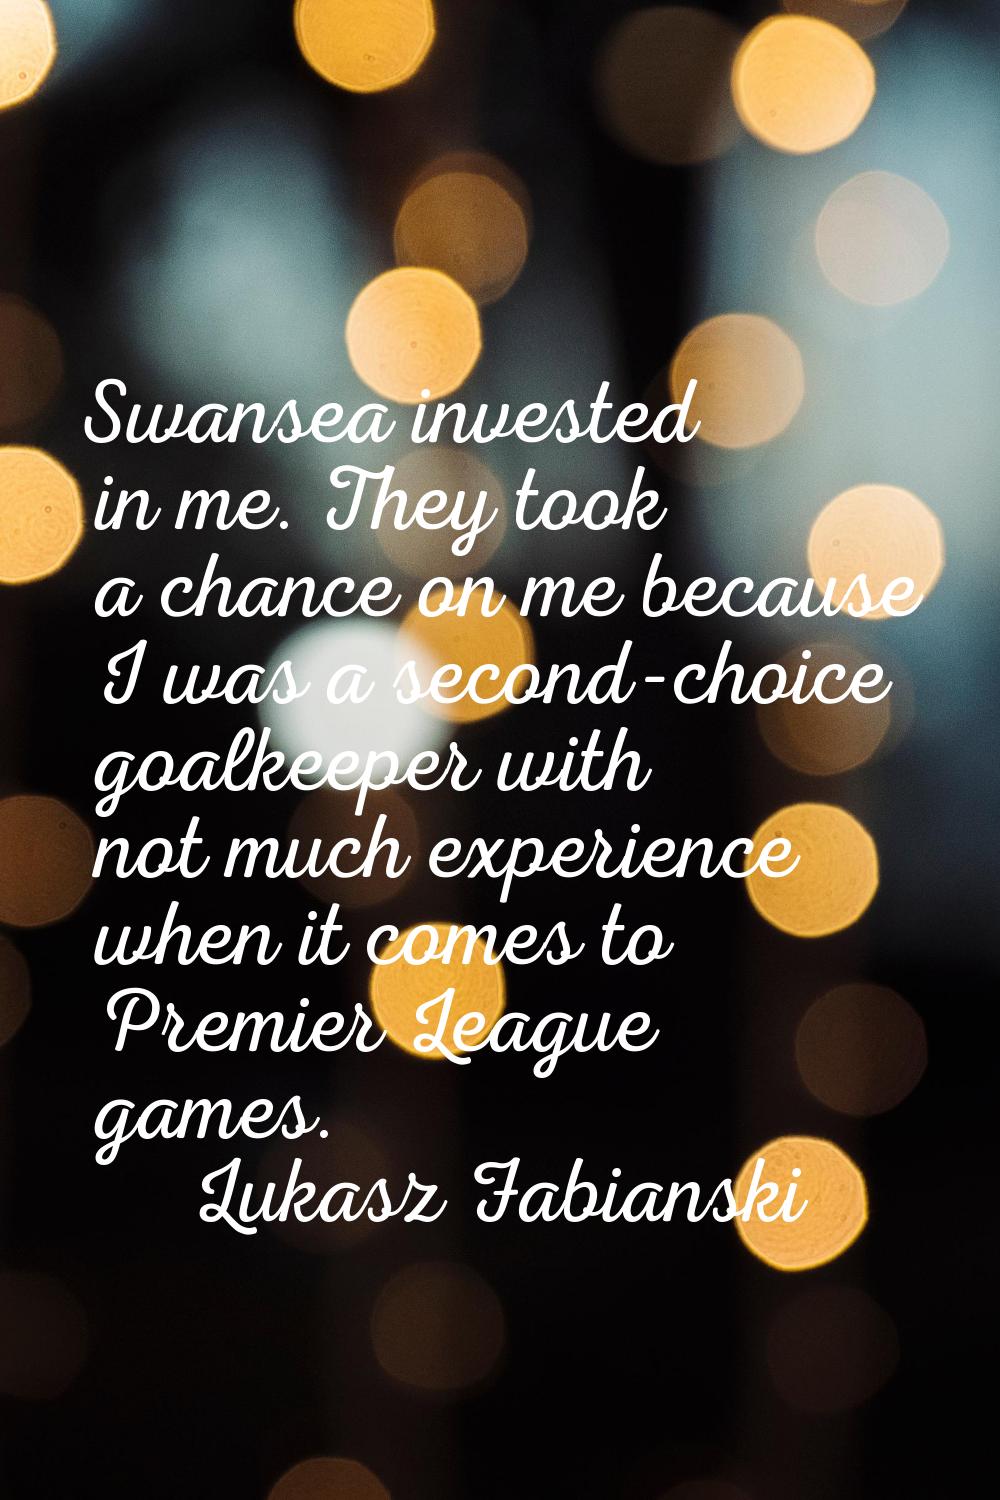 Swansea invested in me. They took a chance on me because I was a second-choice goalkeeper with not 